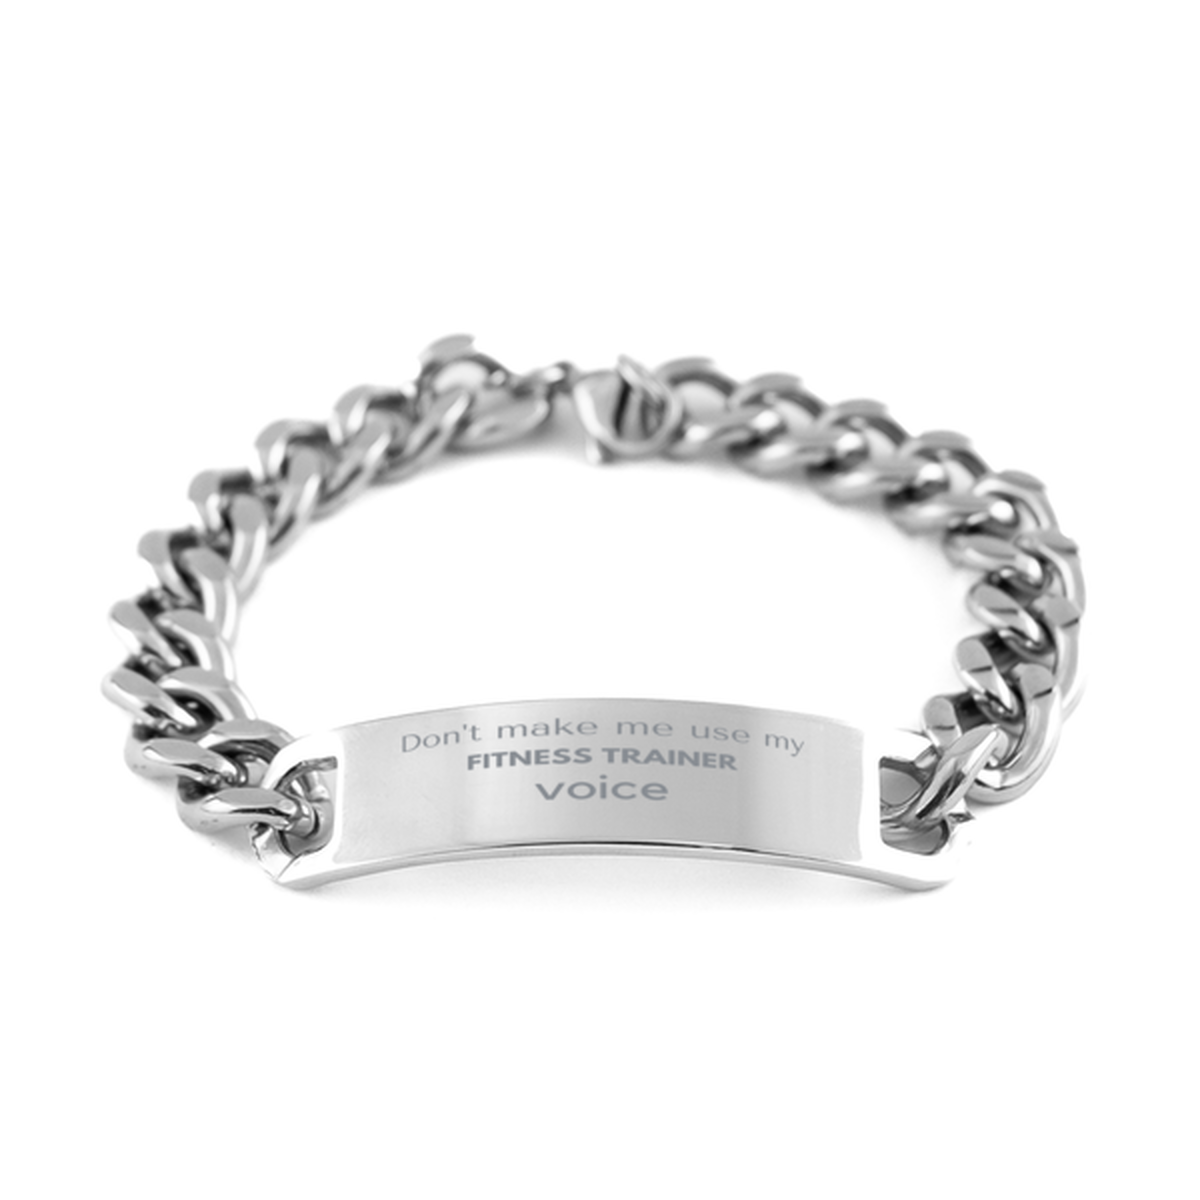 Don't make me use my Fitness Trainer voice, Sarcasm Fitness Trainer Gifts, Christmas Fitness Trainer Cuban Chain Stainless Steel Bracelet Birthday Unique Gifts For Fitness Trainer Coworkers, Men, Women, Colleague, Friends